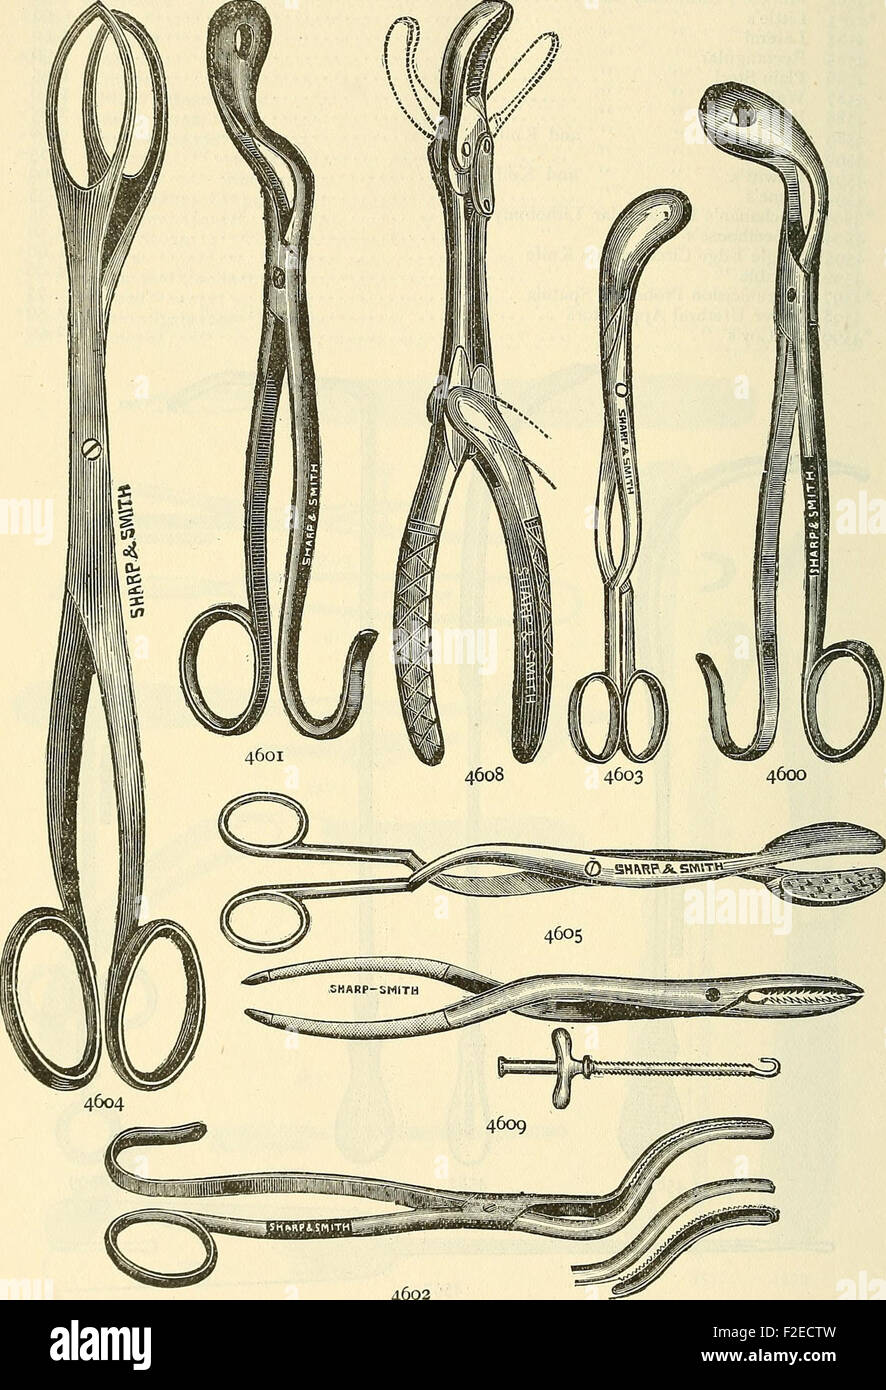 Catalogue of Sharp and Smith - importers, manufacturers, wholesale and retail dealers in surgical instruments, deformity apparatus, artificial limbs, artificial eyes, elastic stockings, trusses, Stock Photo